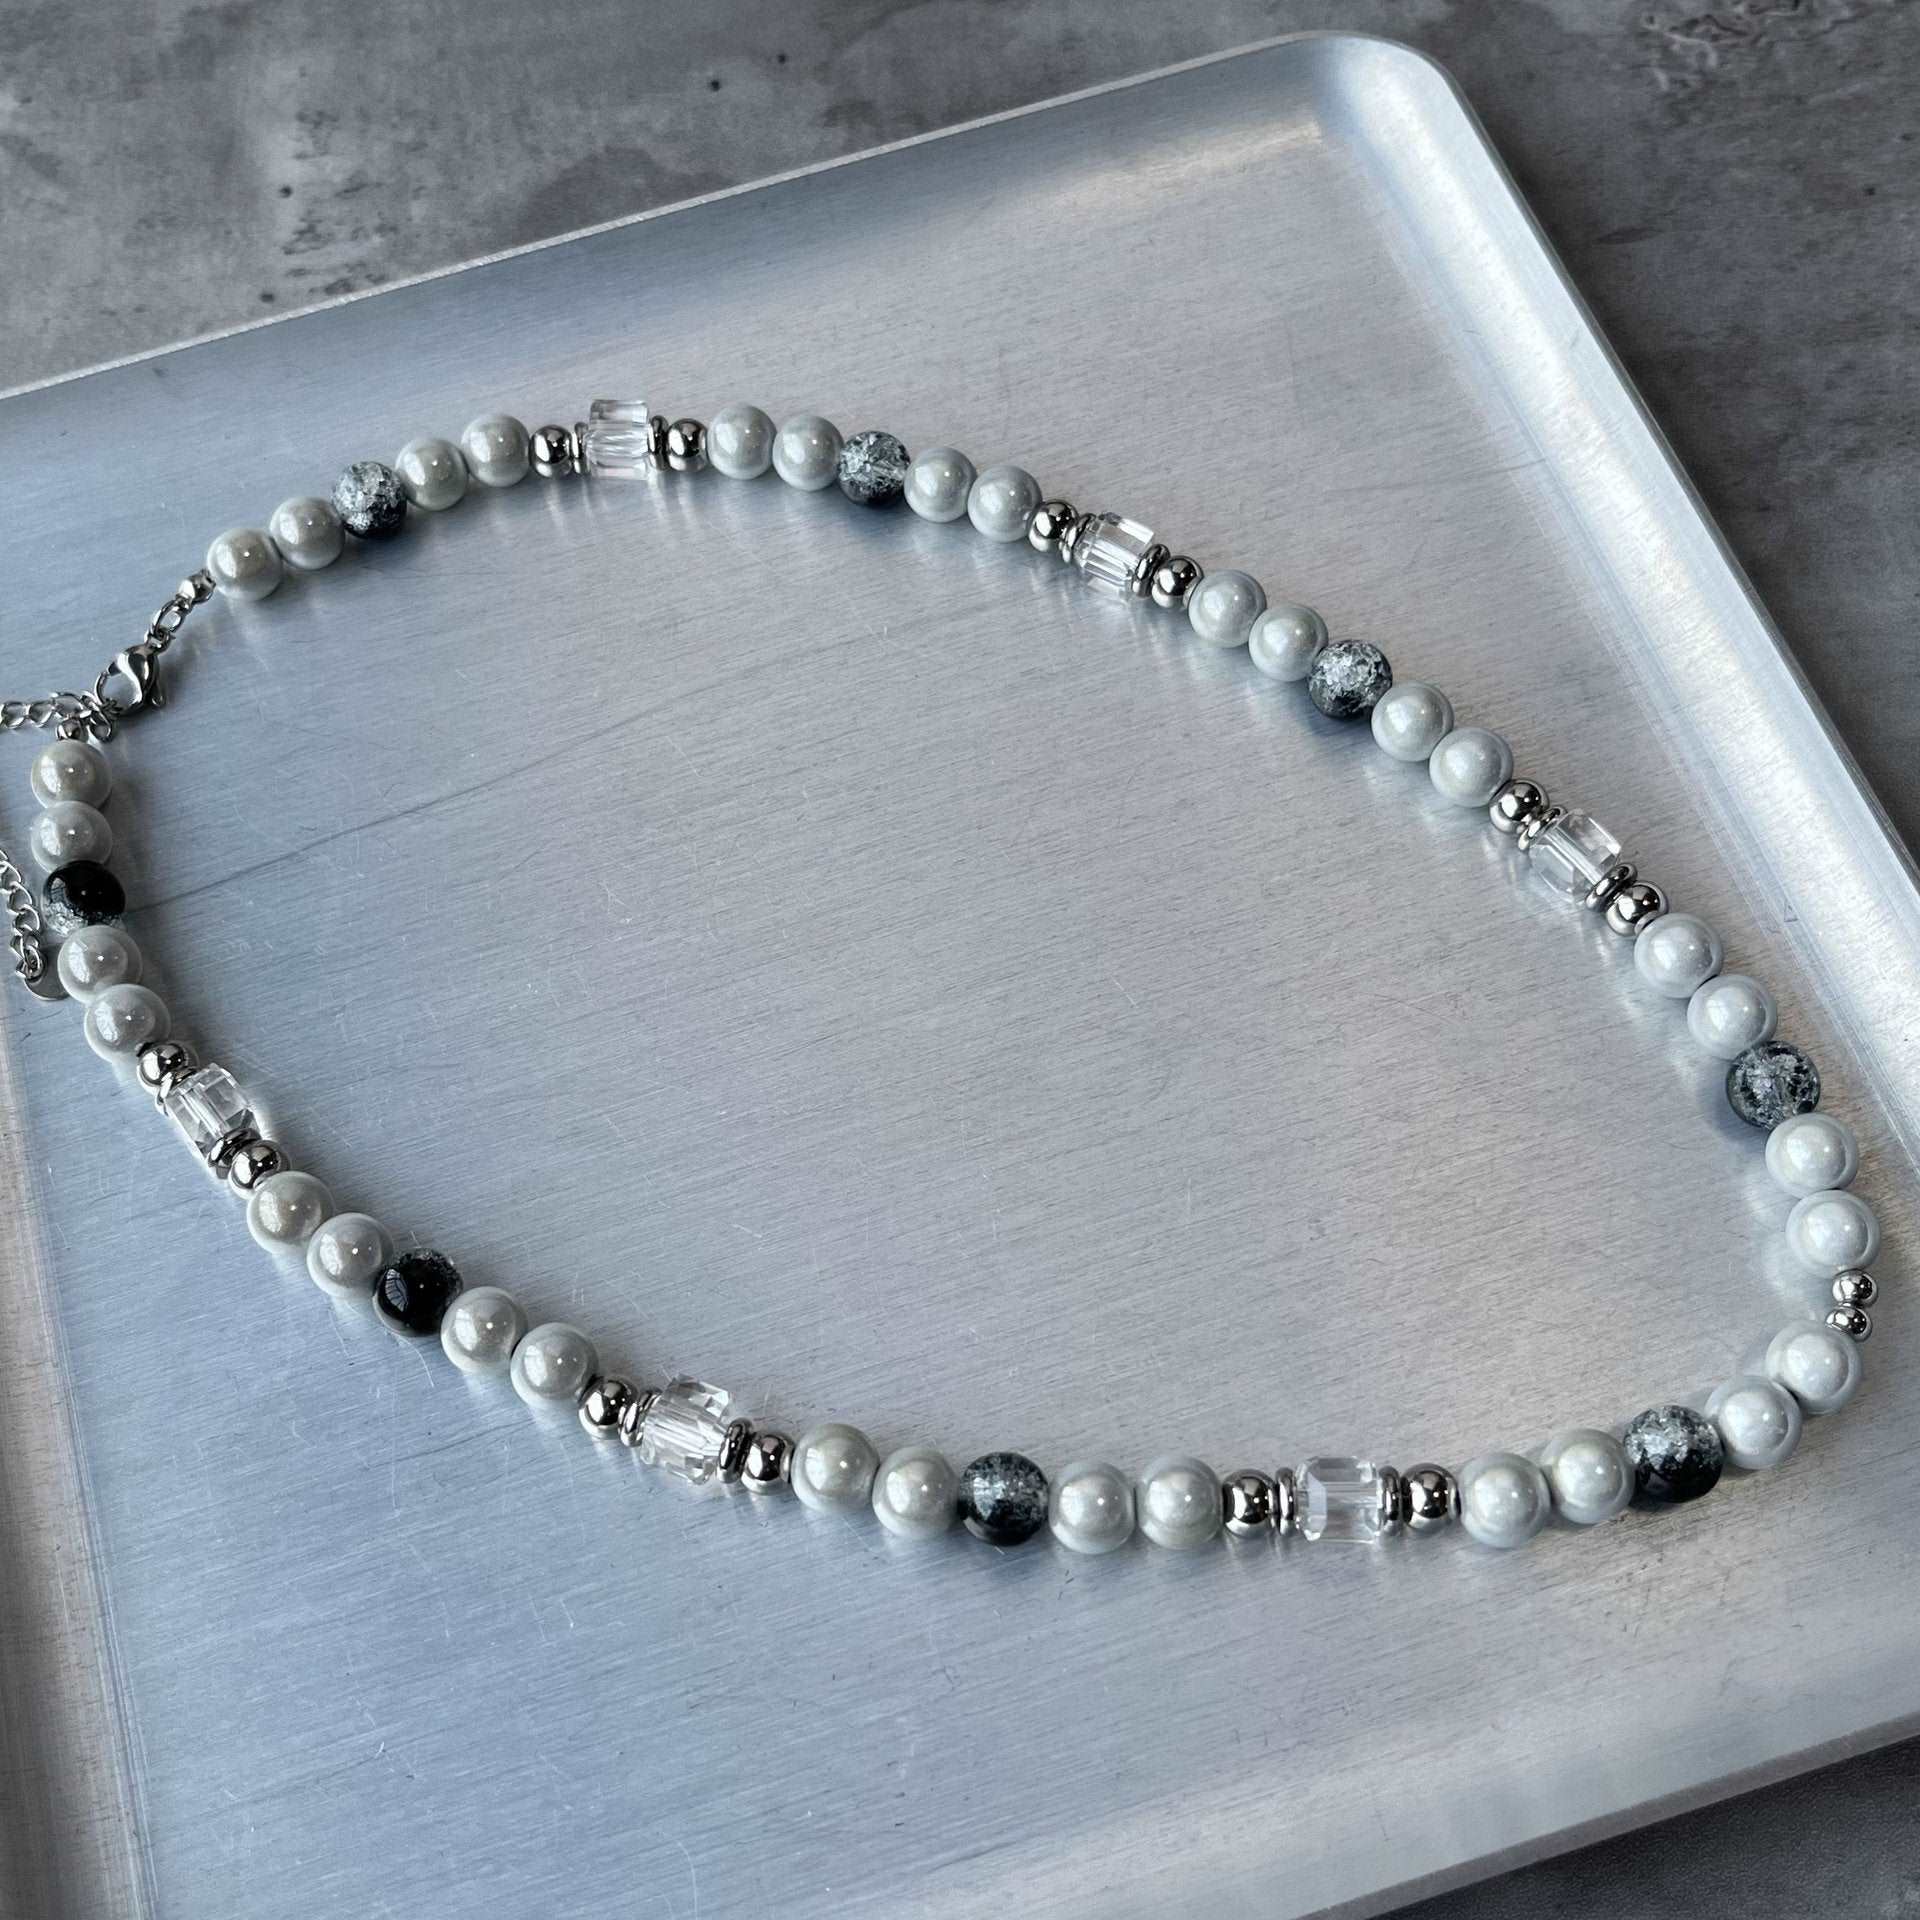 Steel Necklace - "Pearls Reflect"